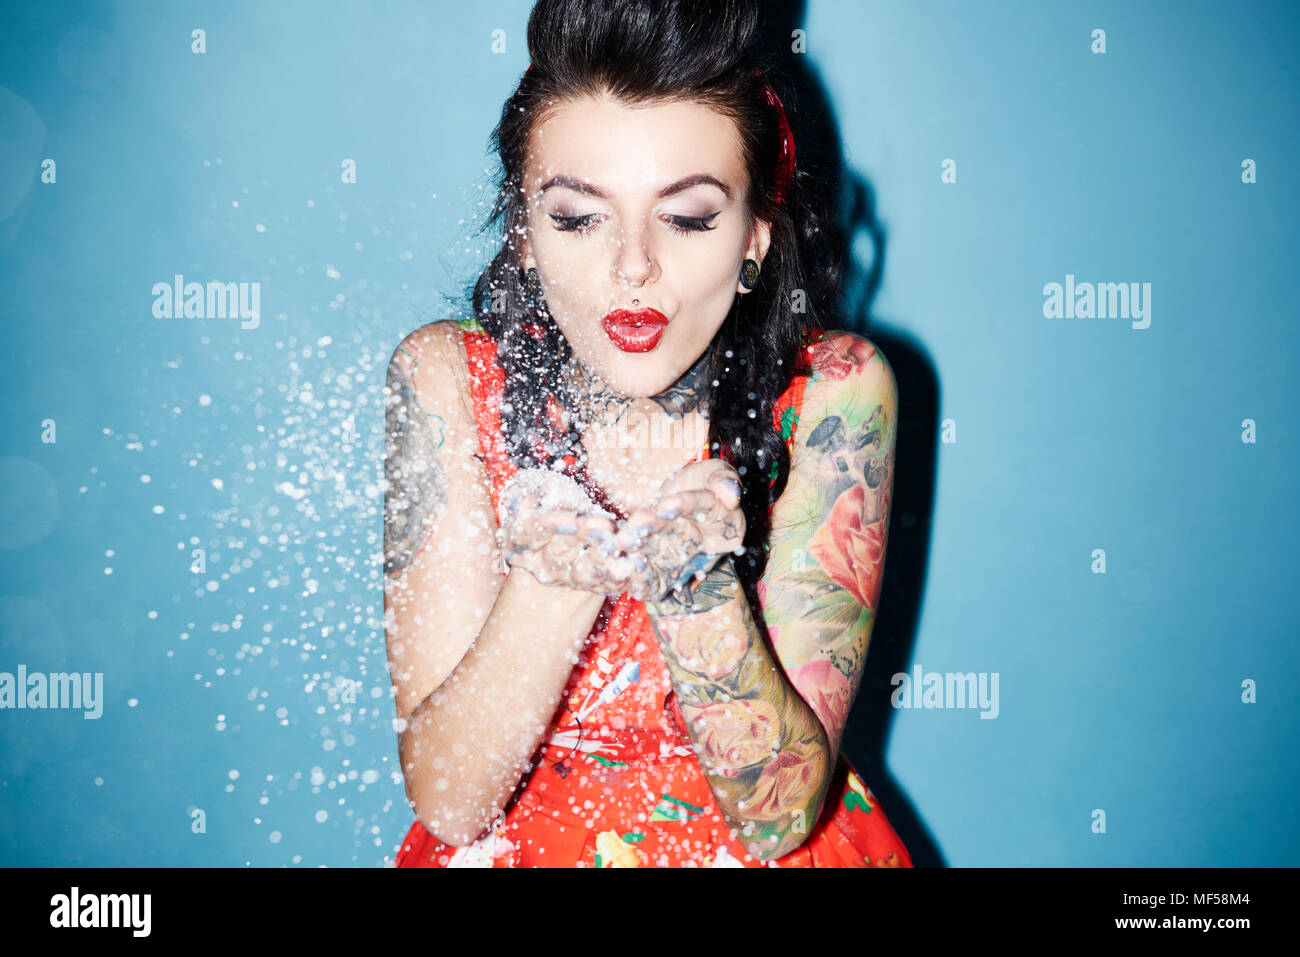 Portrait of tattooed woman blowing artificial snow Stock Photo